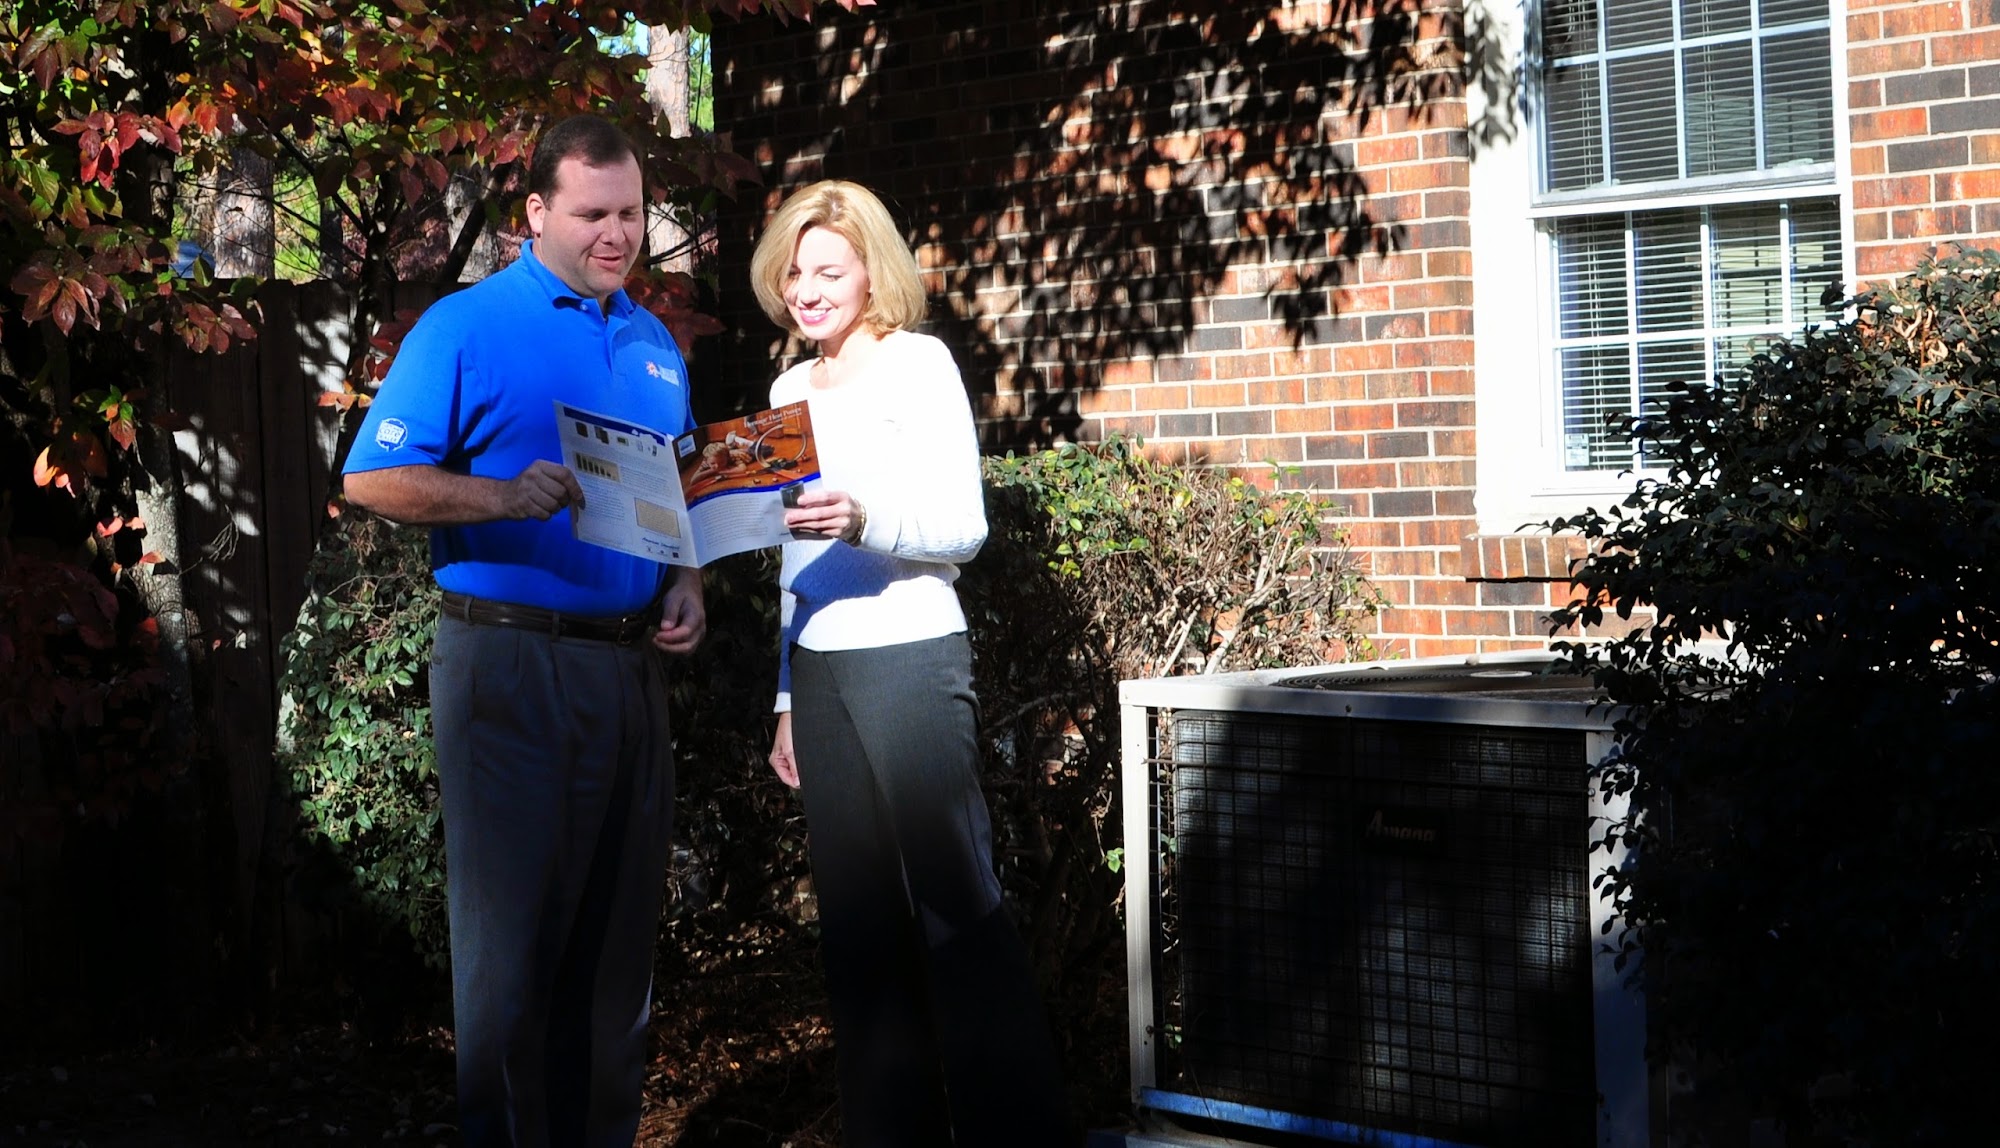 Foust Heating & Air Conditioning, Inc. 2976 Dunn Rd, Eastover North Carolina 28312